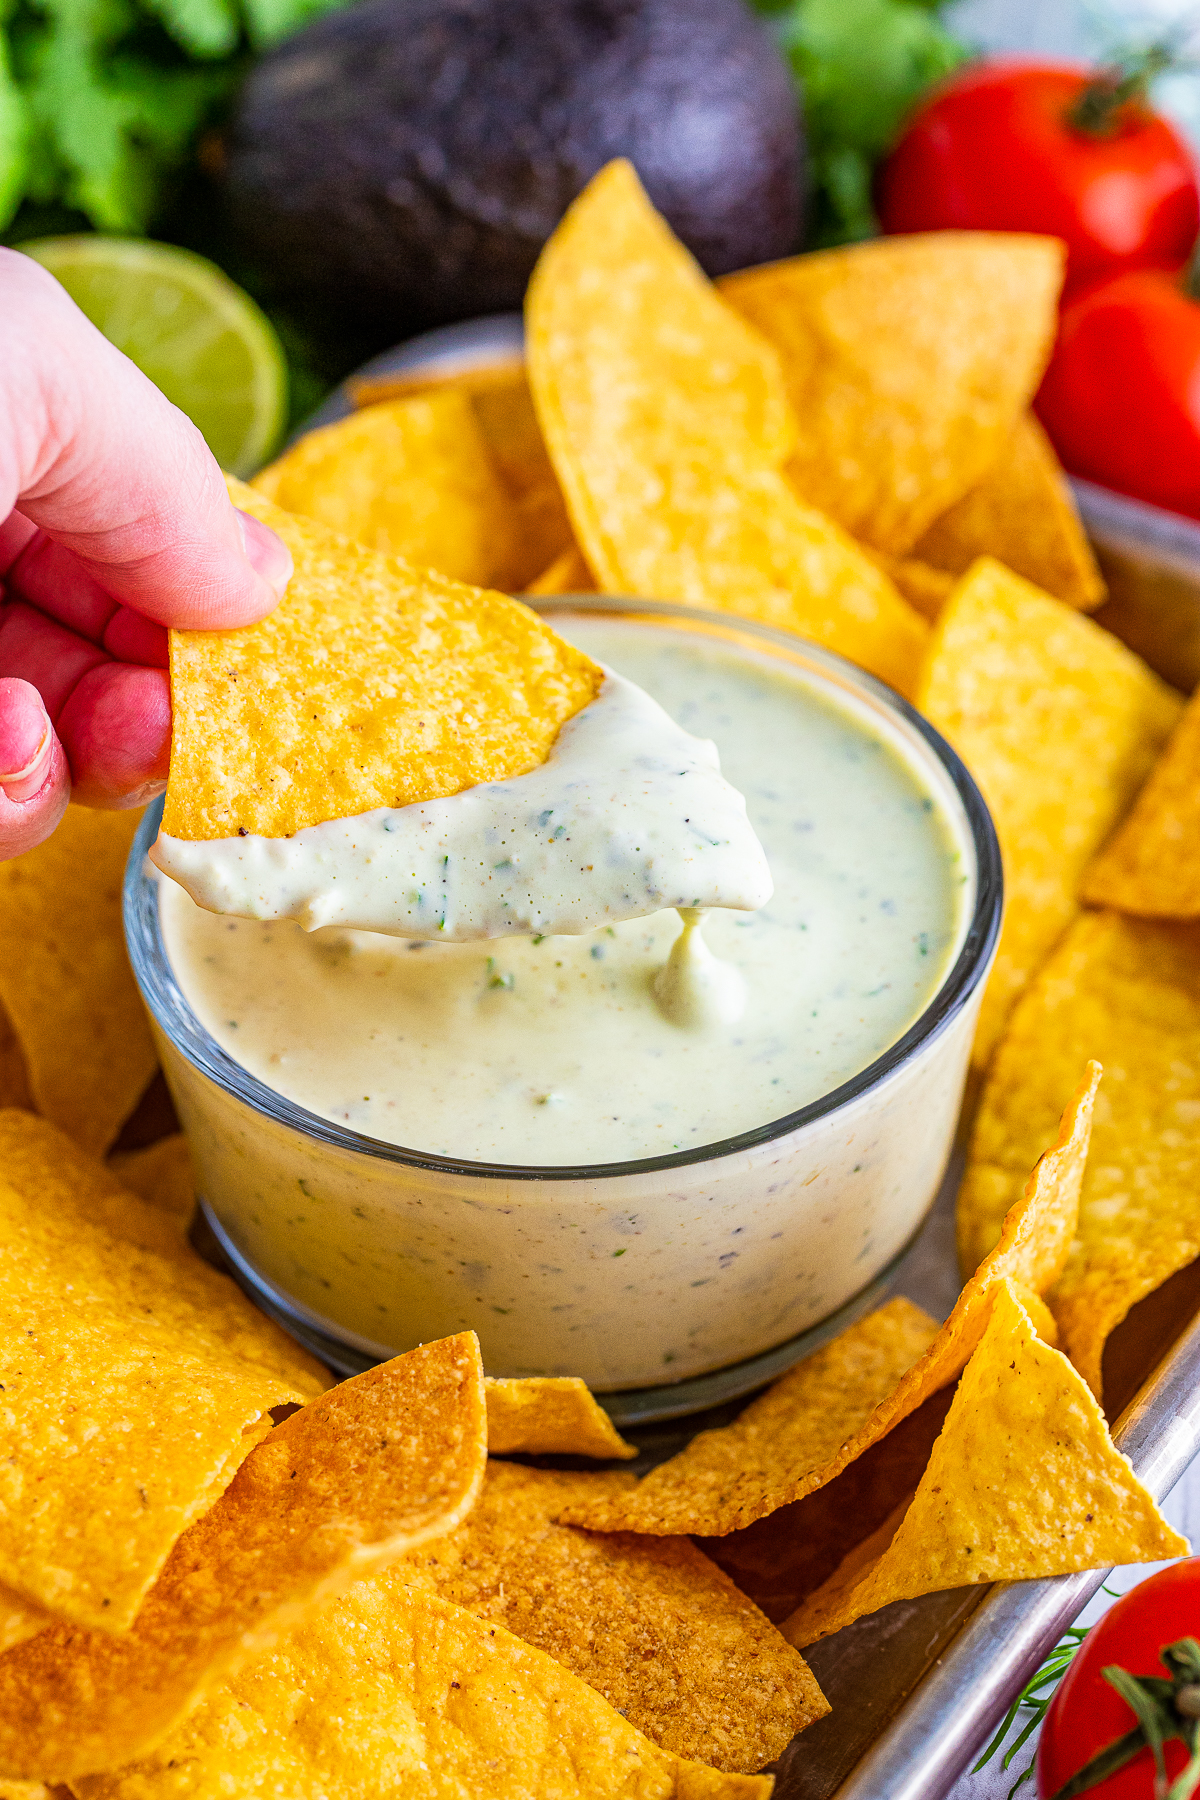 Hand holding up chip with some dip on it.